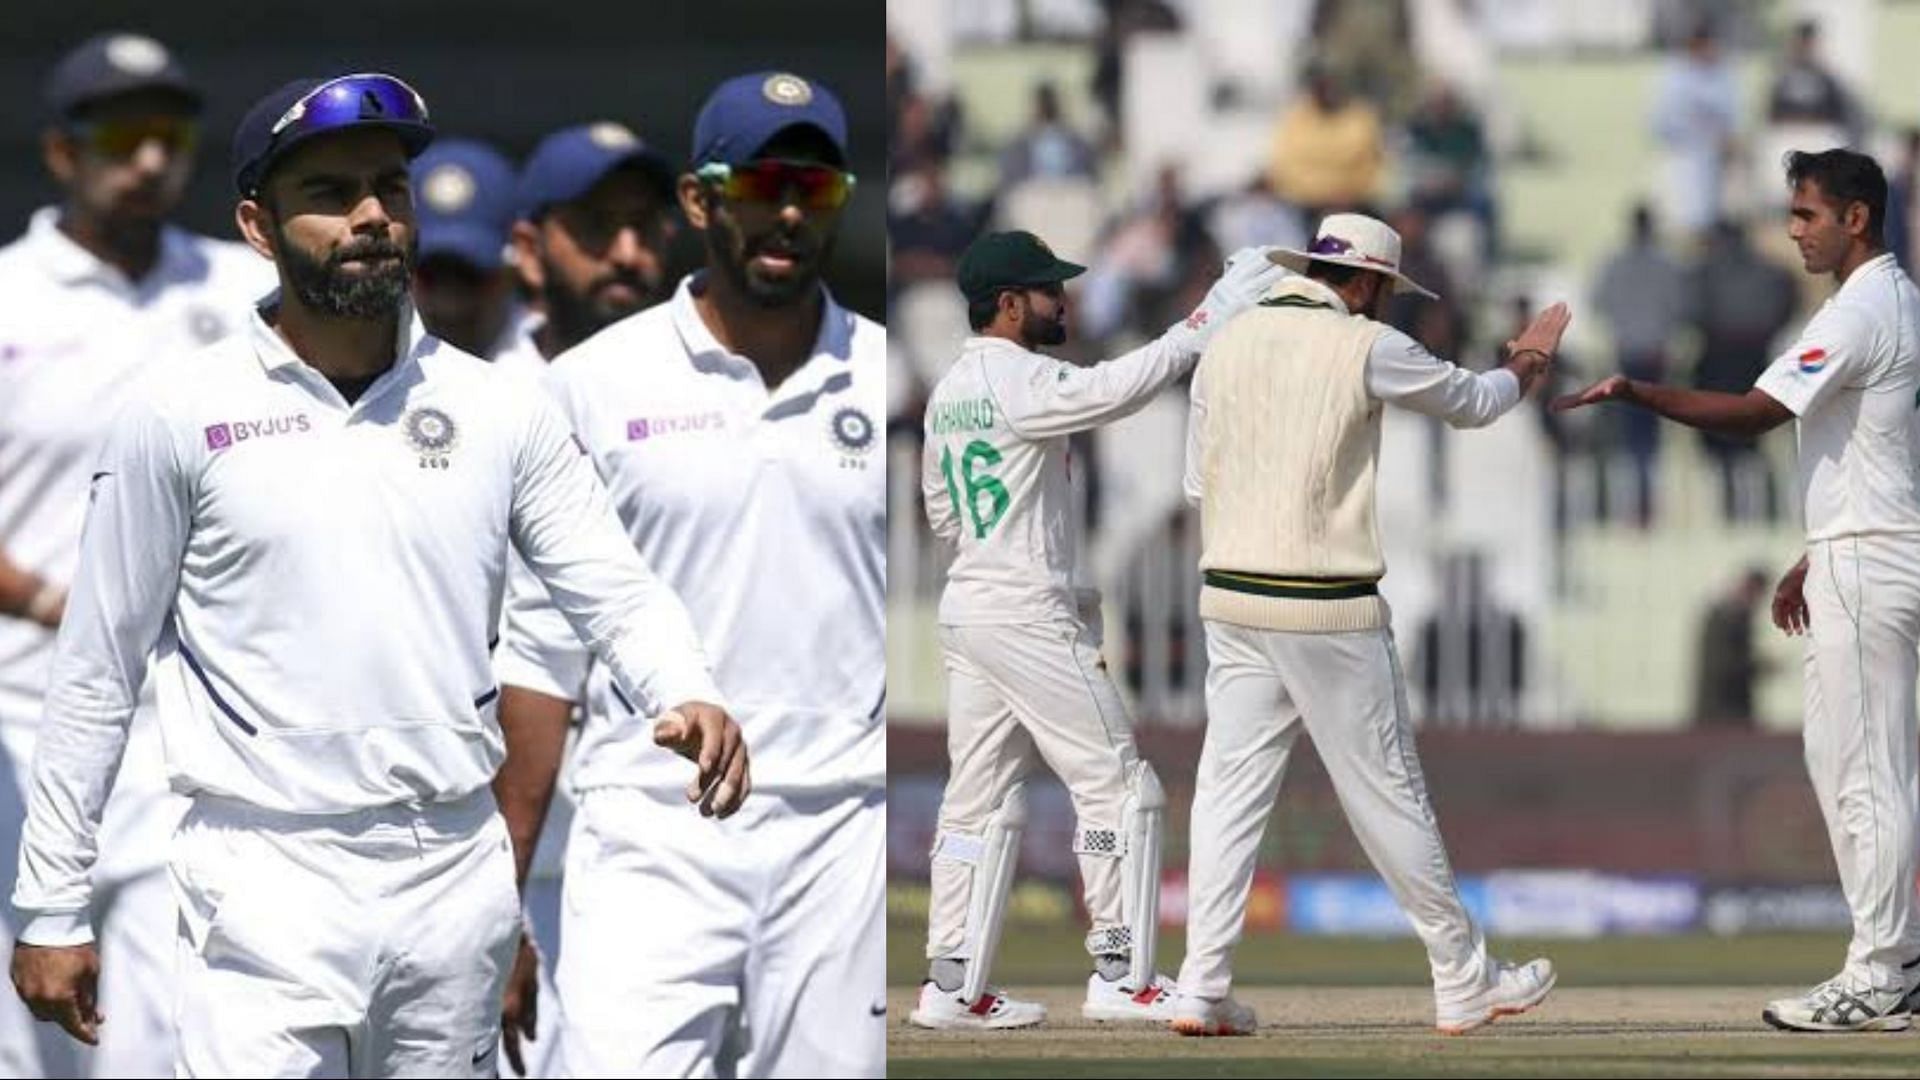 A World Test Championship Final between India and Pakistan is still possible